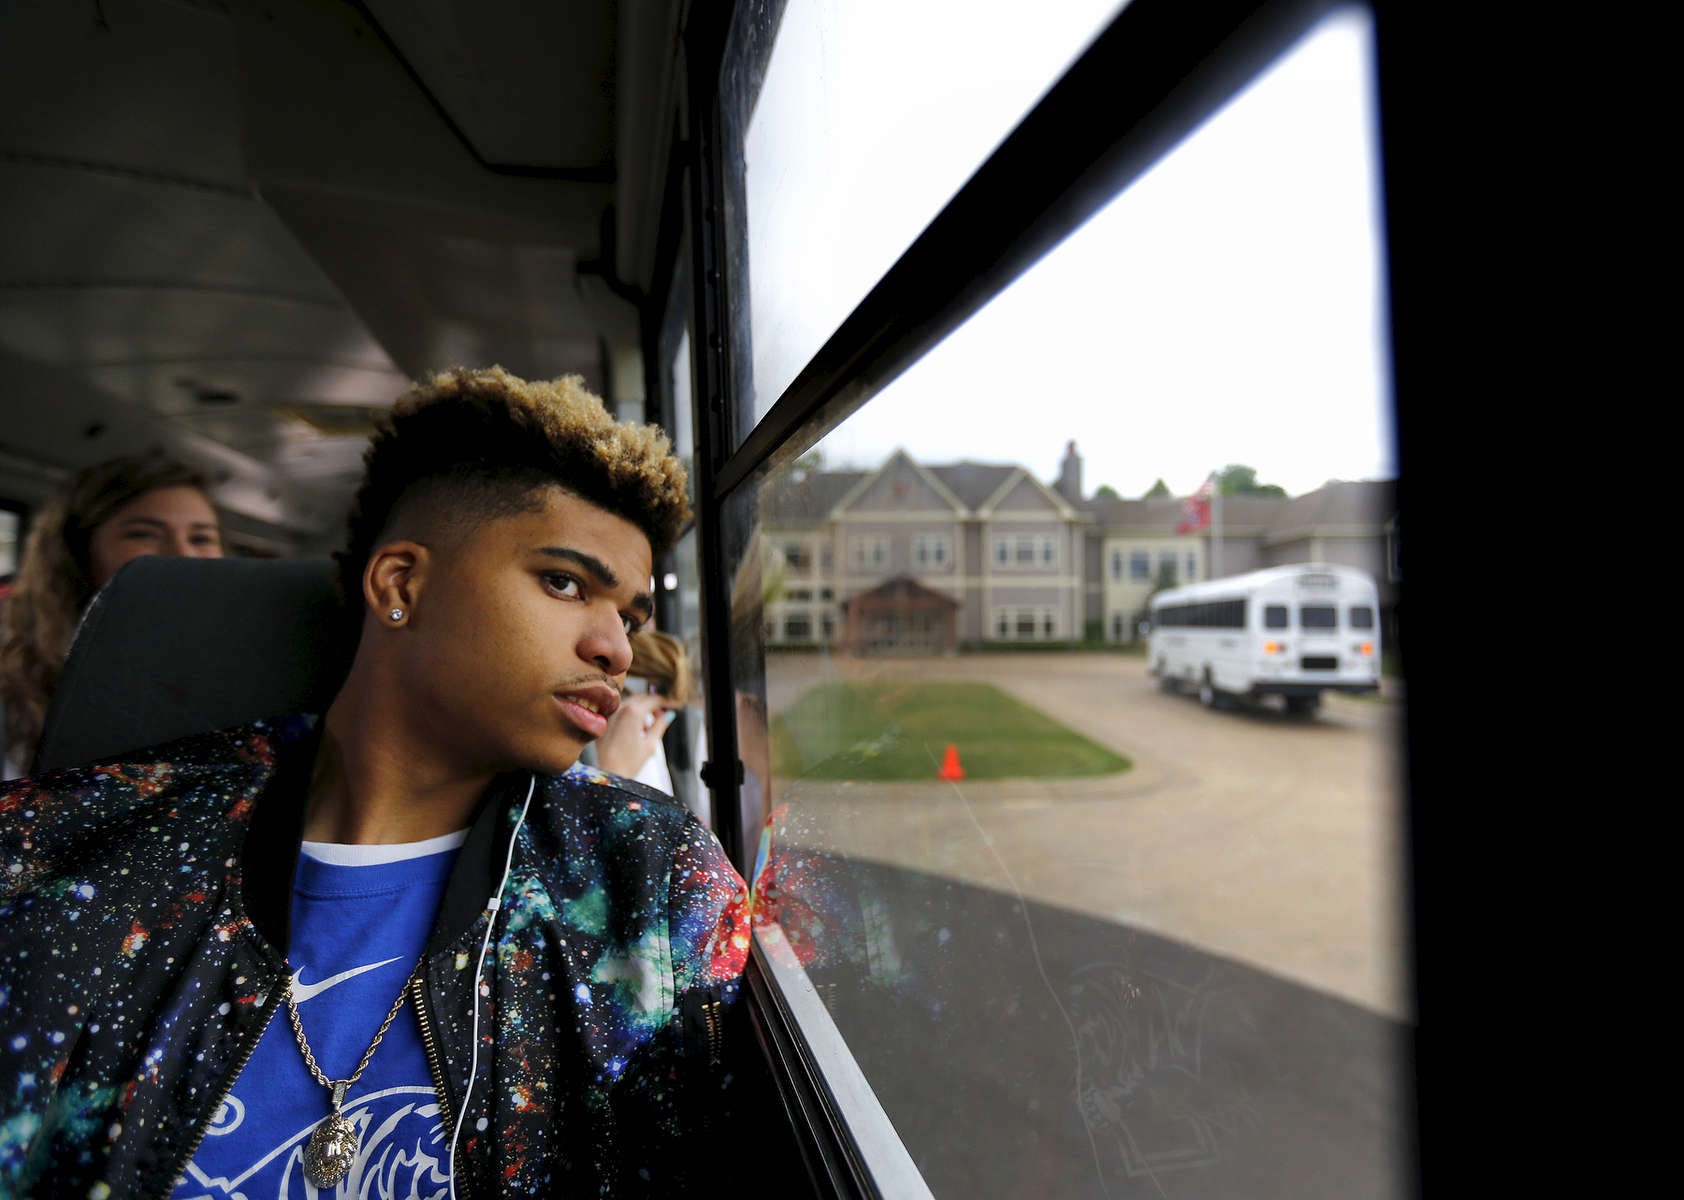 May 16, 2016 - Zearius Jenkins looks out the window of a bus as it departs from the St. George's Independent School Collierville campus filled with the senior class departing on their {quote}Trip to Nowhere{quote}. The field trip is a school tradition in which seniors are taken on an excursion by administrators during their final week of school to a secret location. The busses later pulled up to Autozone Park for the student to take in an afternoon ball game. (Mike Brown/The Commercial Appeal)